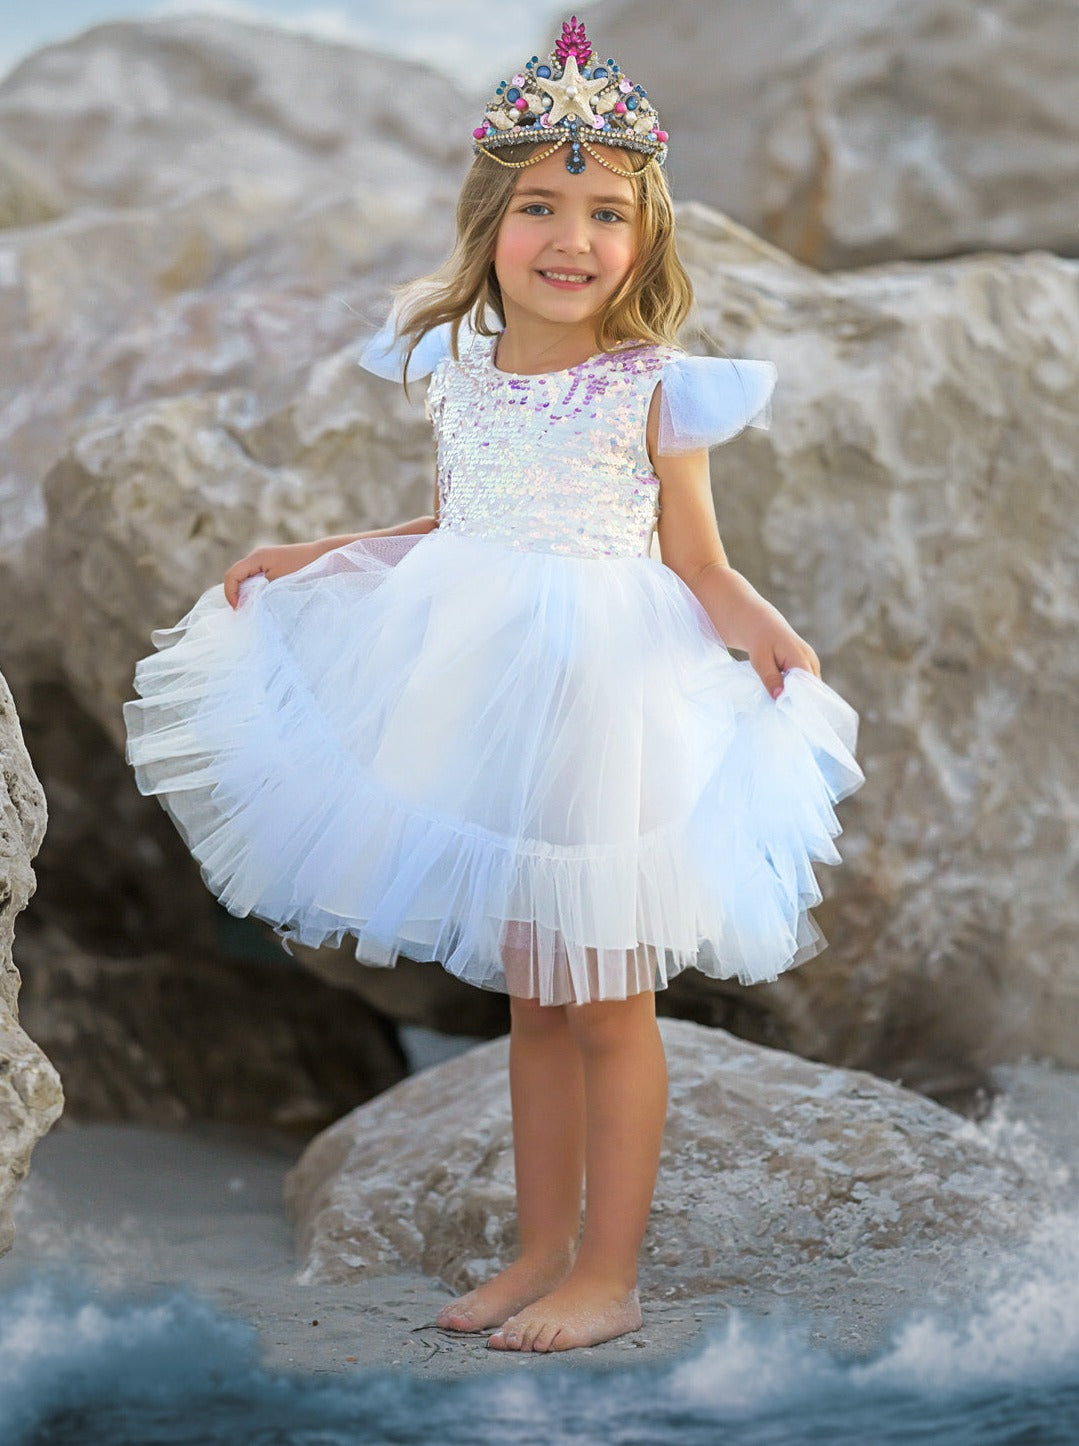 Girls Let's Take a Twirl Special Occasion Tutu Dress